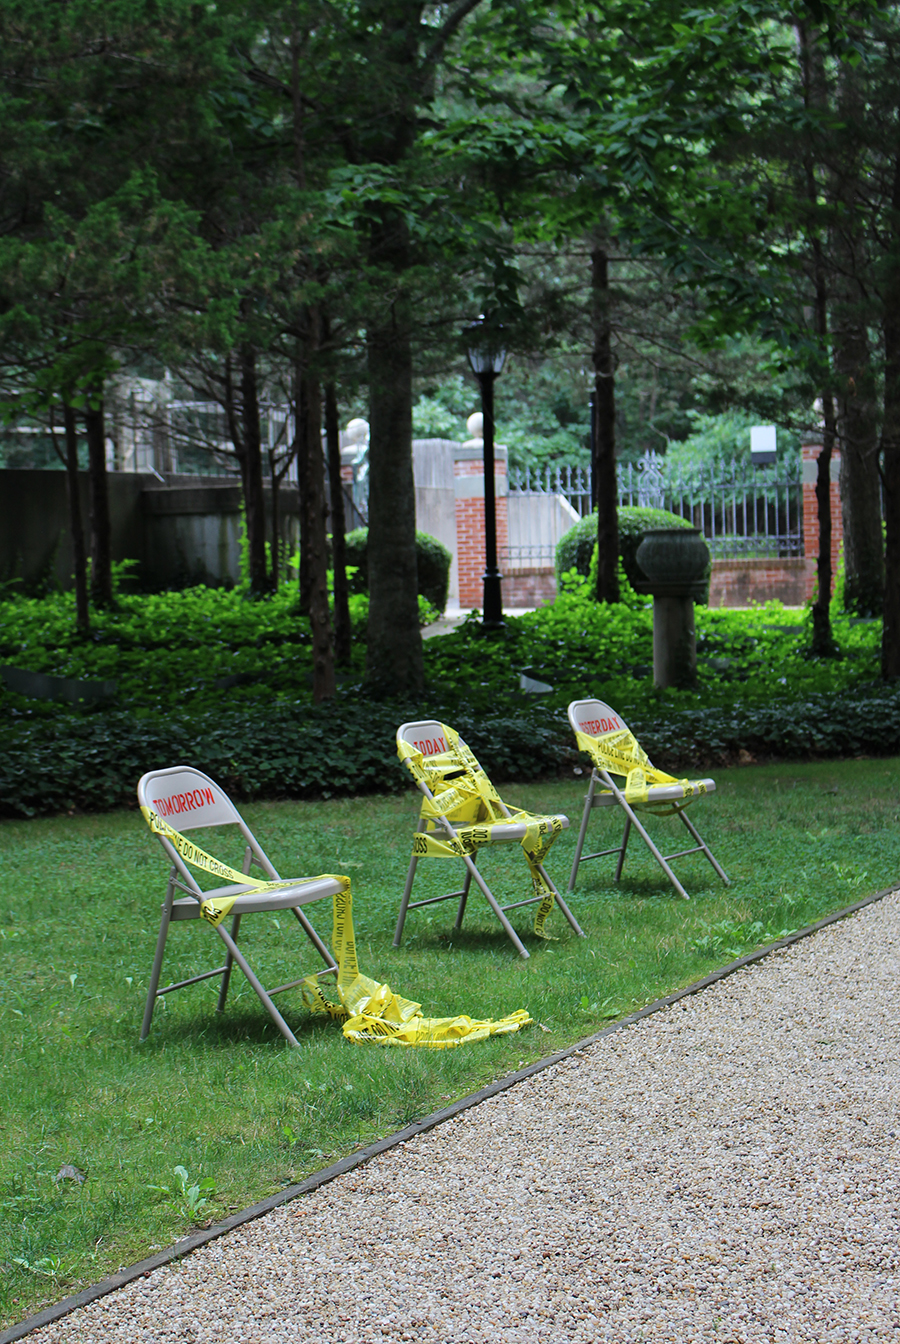 DIVIDED WE STAND, 2020 3 hand-stenciled metal folding chairs, police tape' 40 x 192 x 48 inches